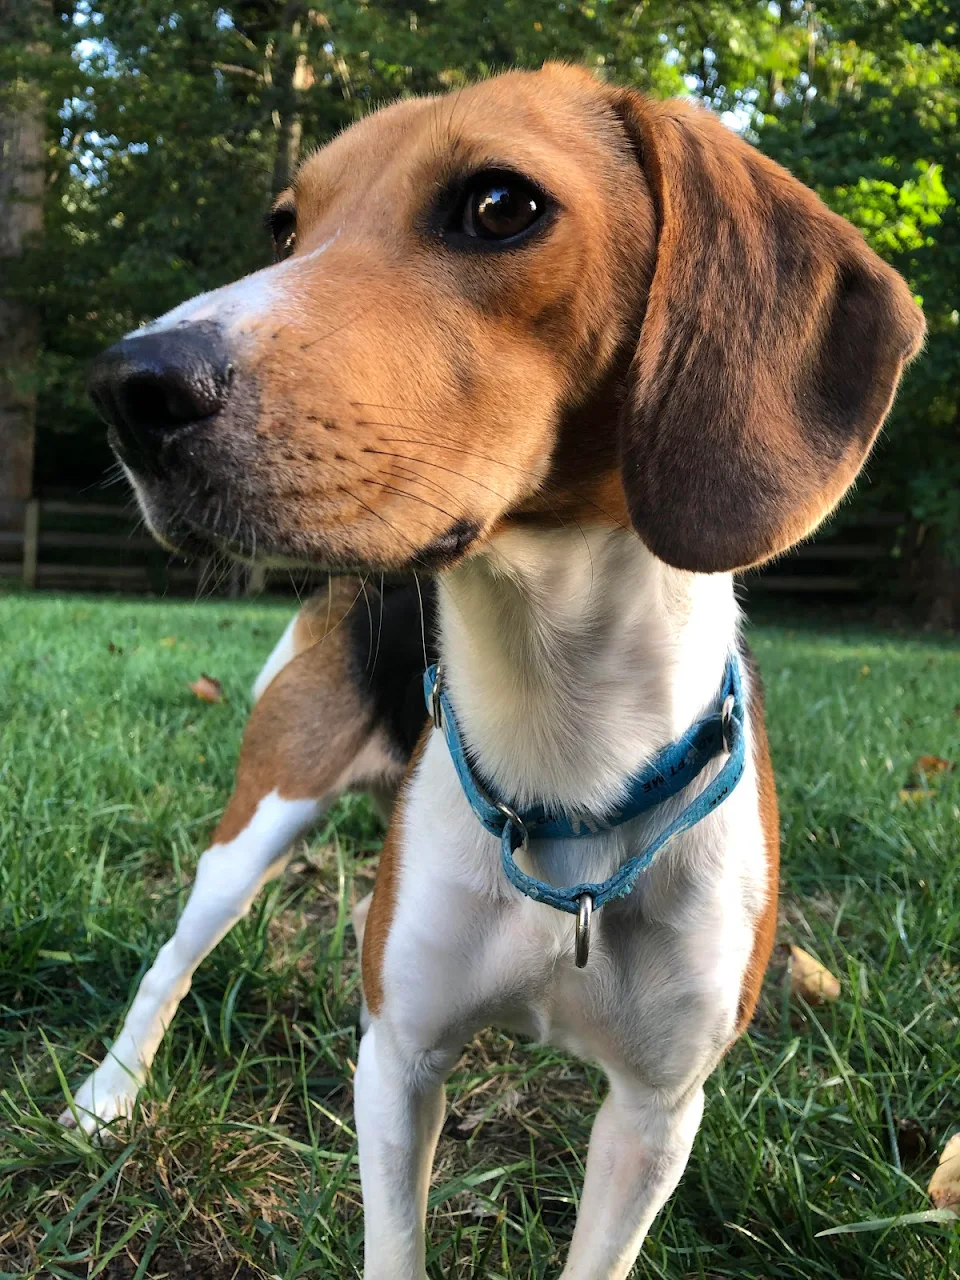 Todd is my foster and 1 of 4000 Envigo beagles. He’s learning about love and playtime and he’s the best boy.